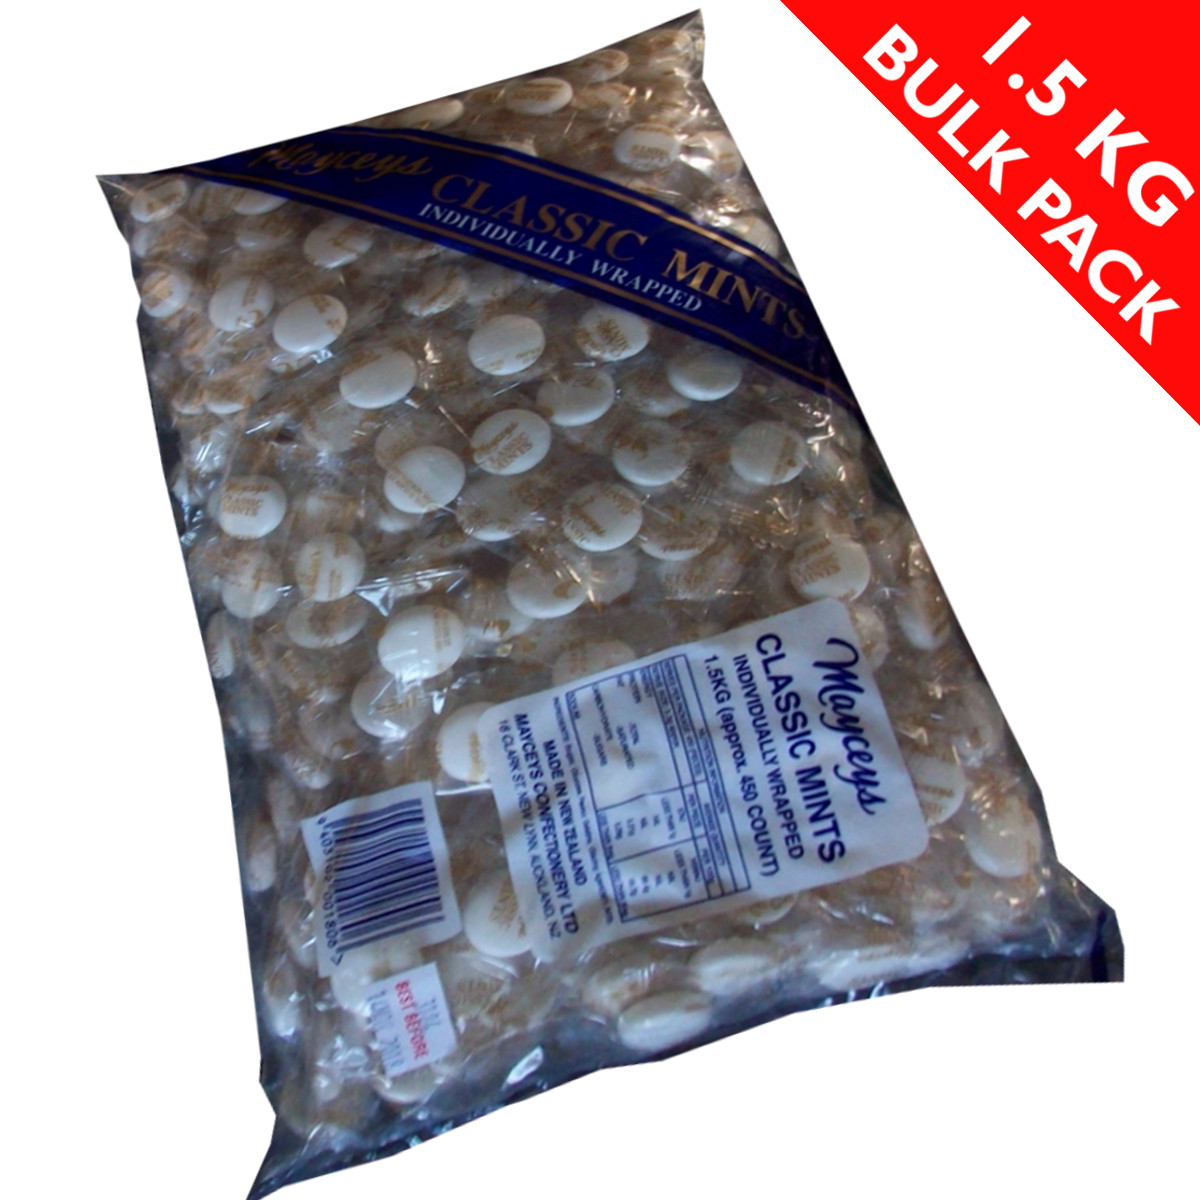 Bulk Individually Wrapped Christmas Candy
 Classic Mints – 1 5kg